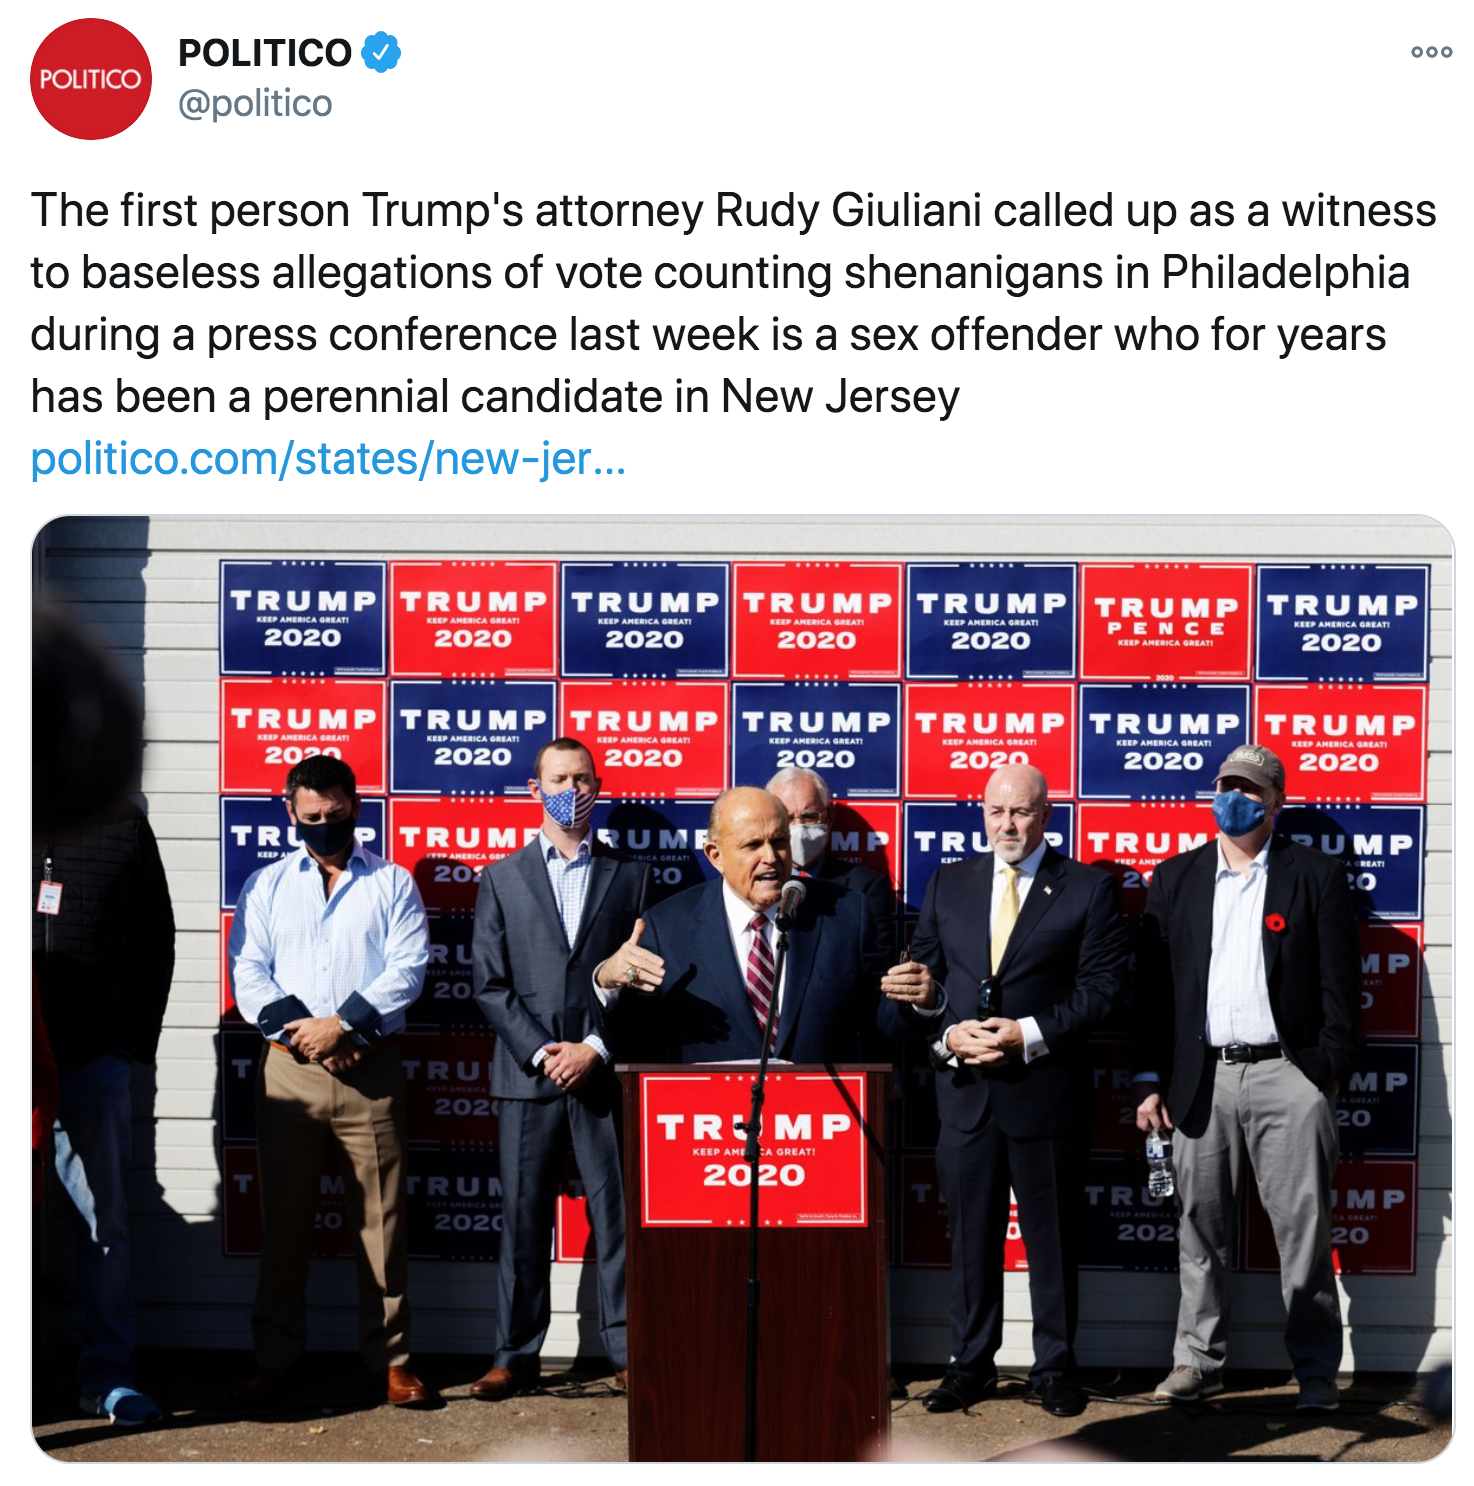 communication - 000 Politico Politico The first person Trump's attorney Rudy Giuliani called up as a witness to baseless allegations of vote counting shenanigans in Philadelphia during a press conference last week is a sex offender who for years has been 